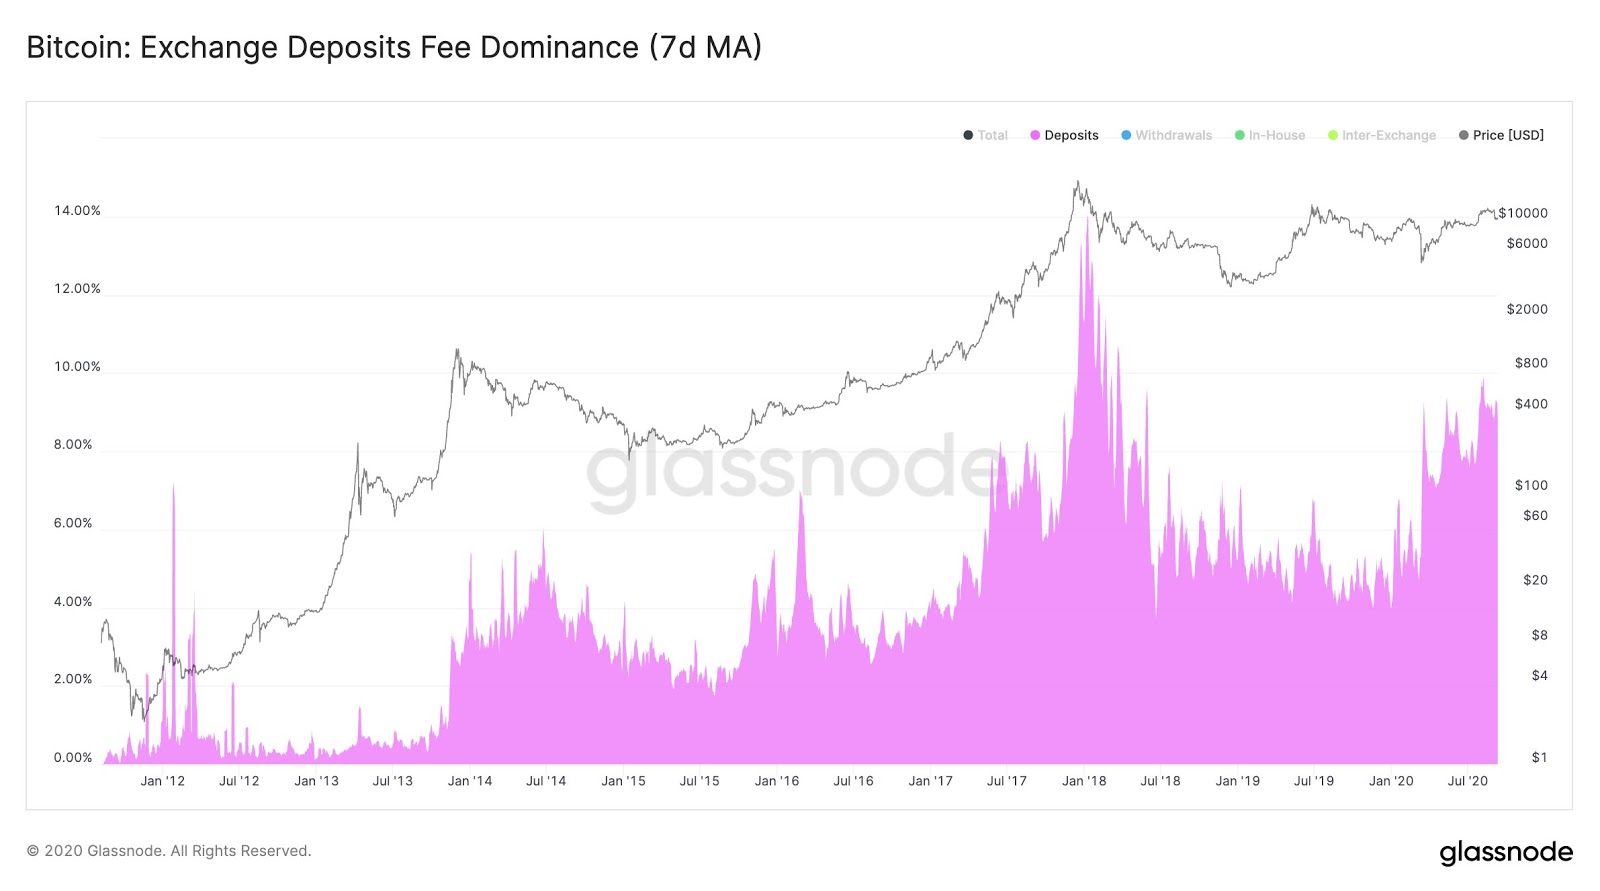 Bitcoin fees are being sold on exchanges